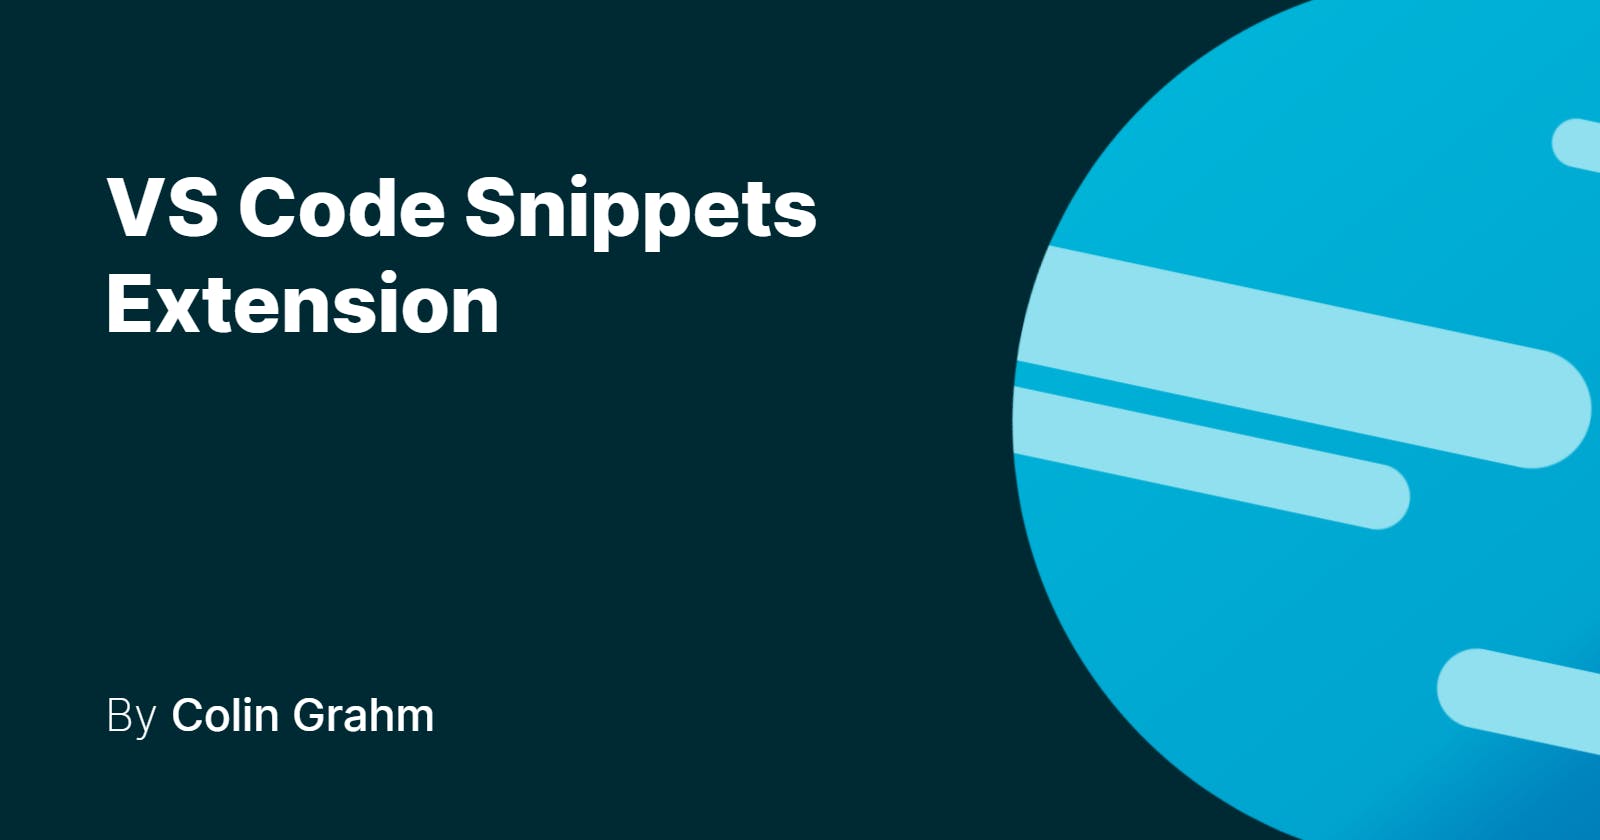 VS Code Snippets Extension